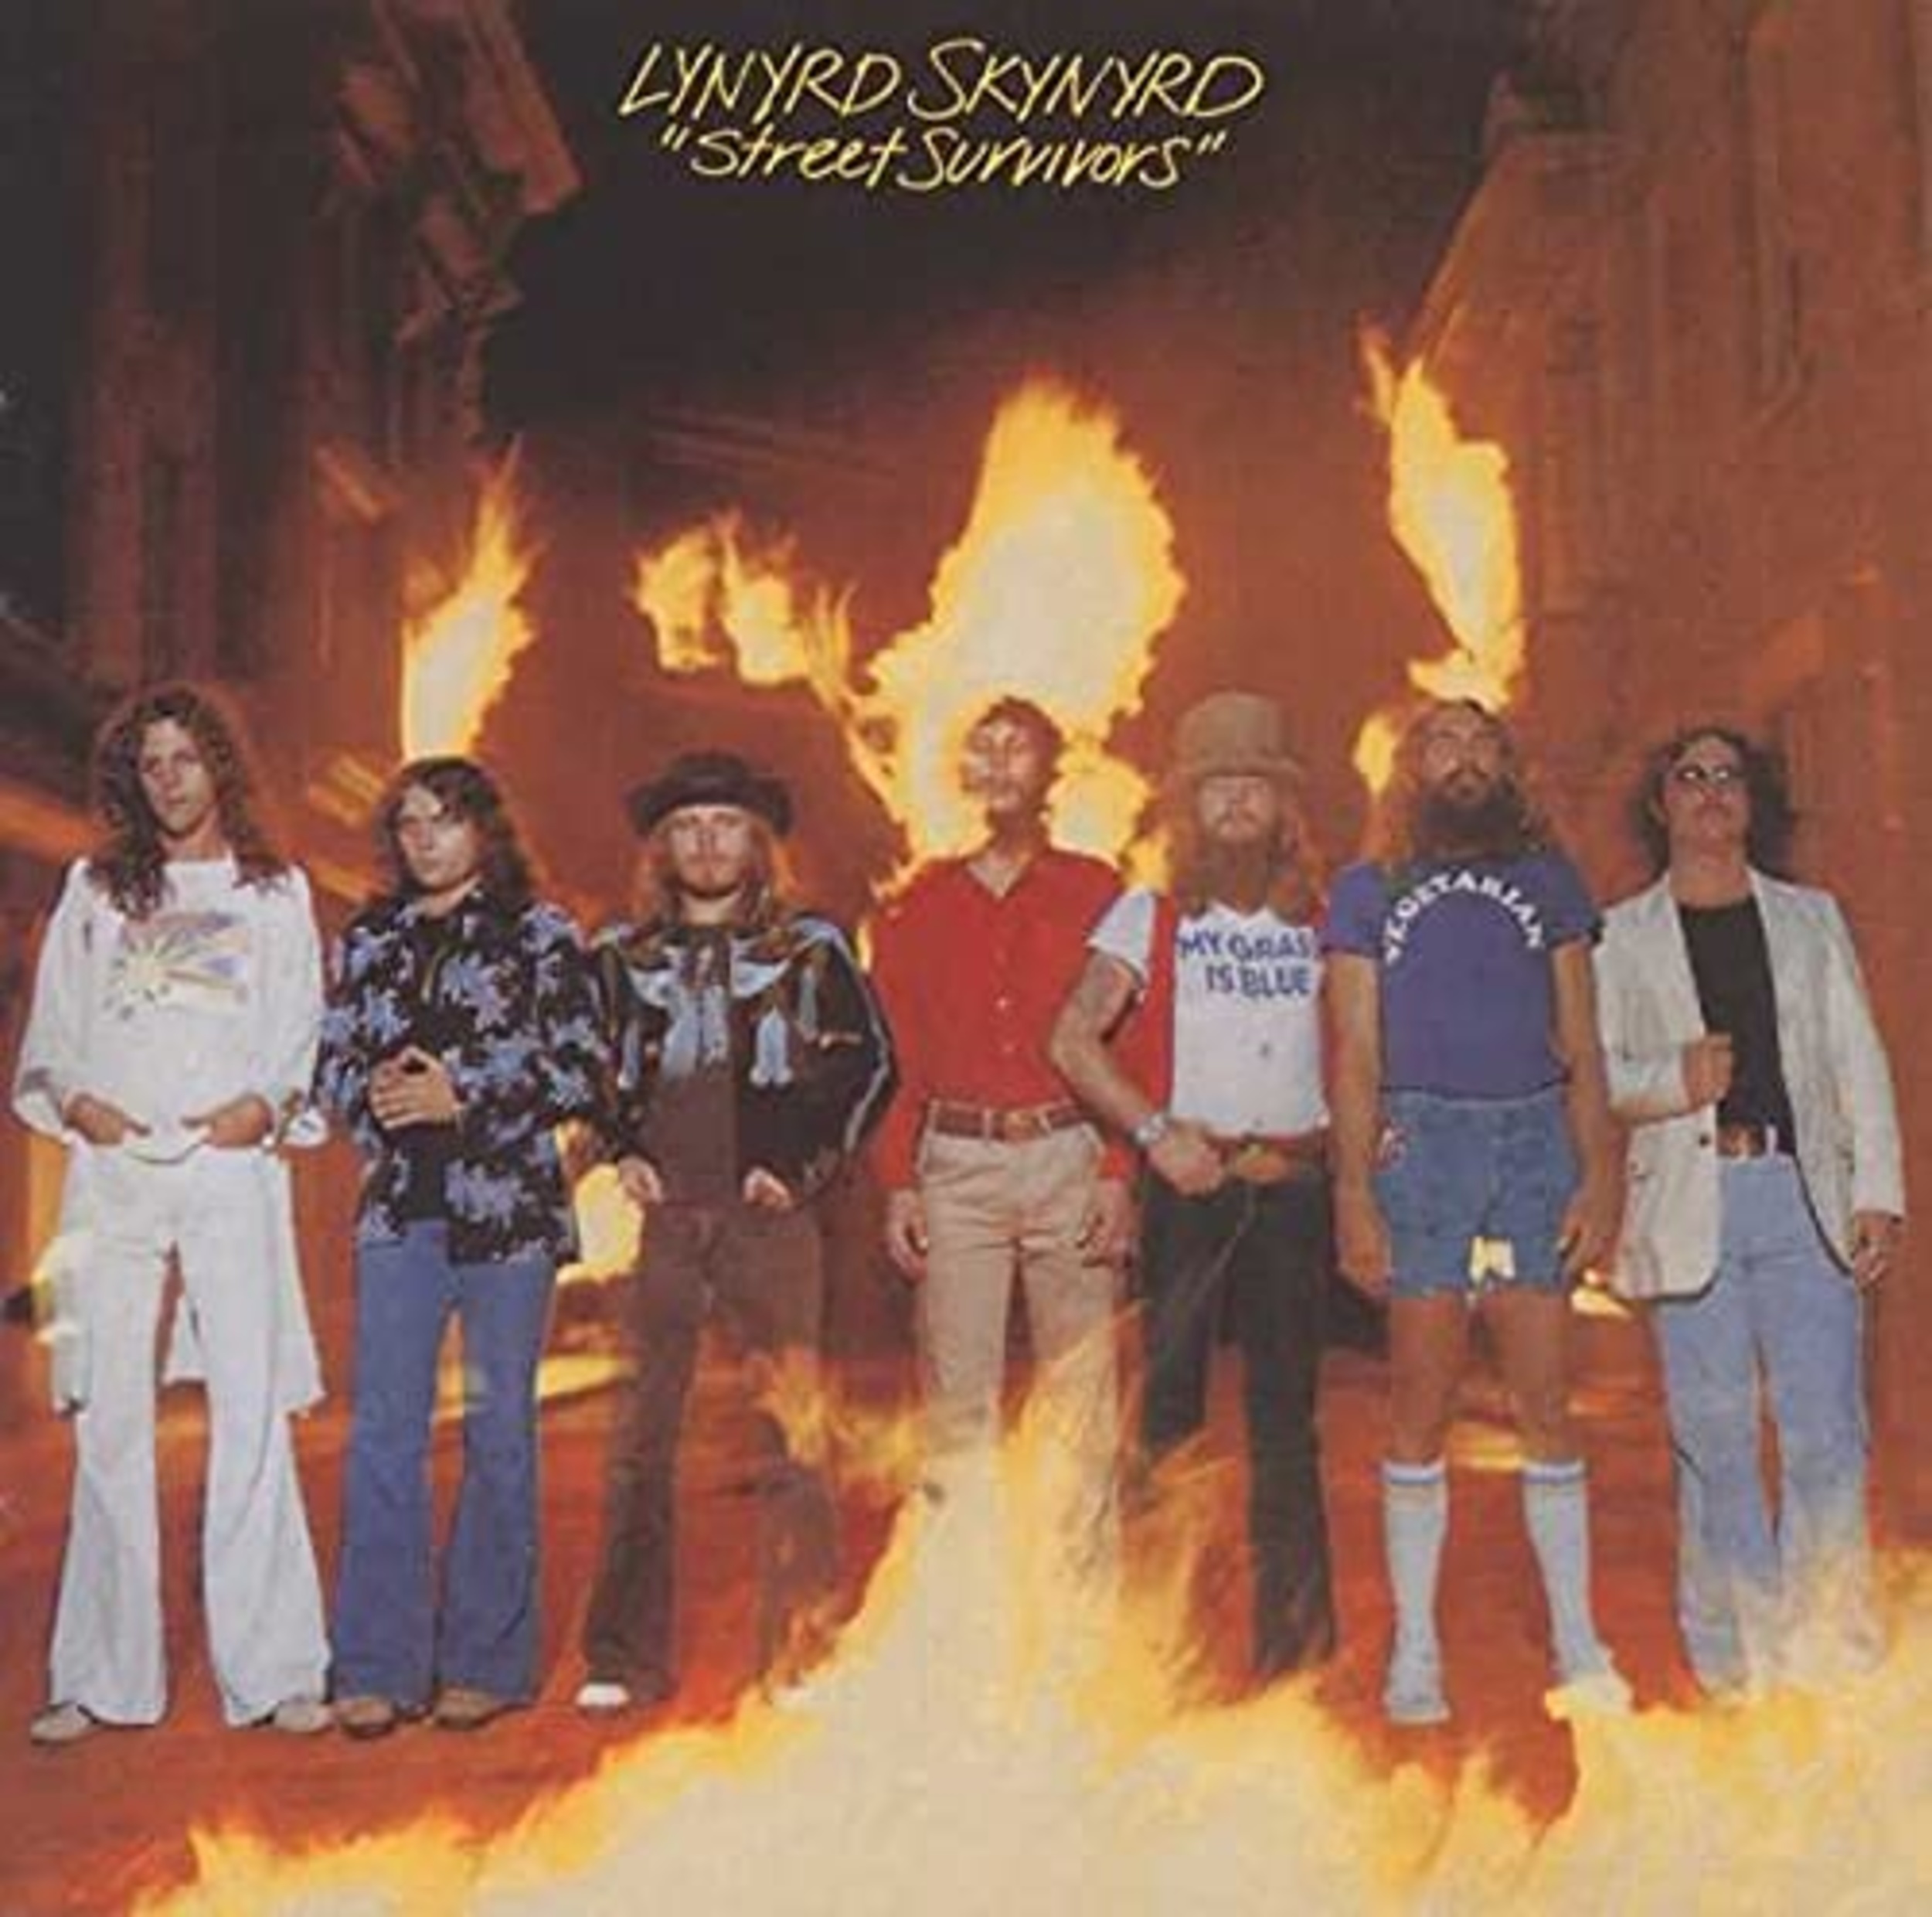 <p><a href="https://www.youtube.com/watch?v=0RGsNY-P4oM">One of Skynyrd's most successful tracks</a>, peaking at No. 13 on <em>Billboard</em>'s Hot 100. Another great story song, at one point roughly detailing a hotel bar fight involving members of the band's road and stage crew. It's also one Lynyrd Skynyrd tune that truly encompasses the collective talent within the band. From Ronnie Van Zant's vocals to the overall guitar work to Billy Powell's high-level piano playing, it's pretty much what fans loved — and still cherish — about the group. </p><p>You may also like: <a href='https://www.yardbarker.com/entertainment/articles/hit_movies_with_no_stars_in_the_cast/s1__39277917'>Hit movies with no 'stars' in the cast</a></p>